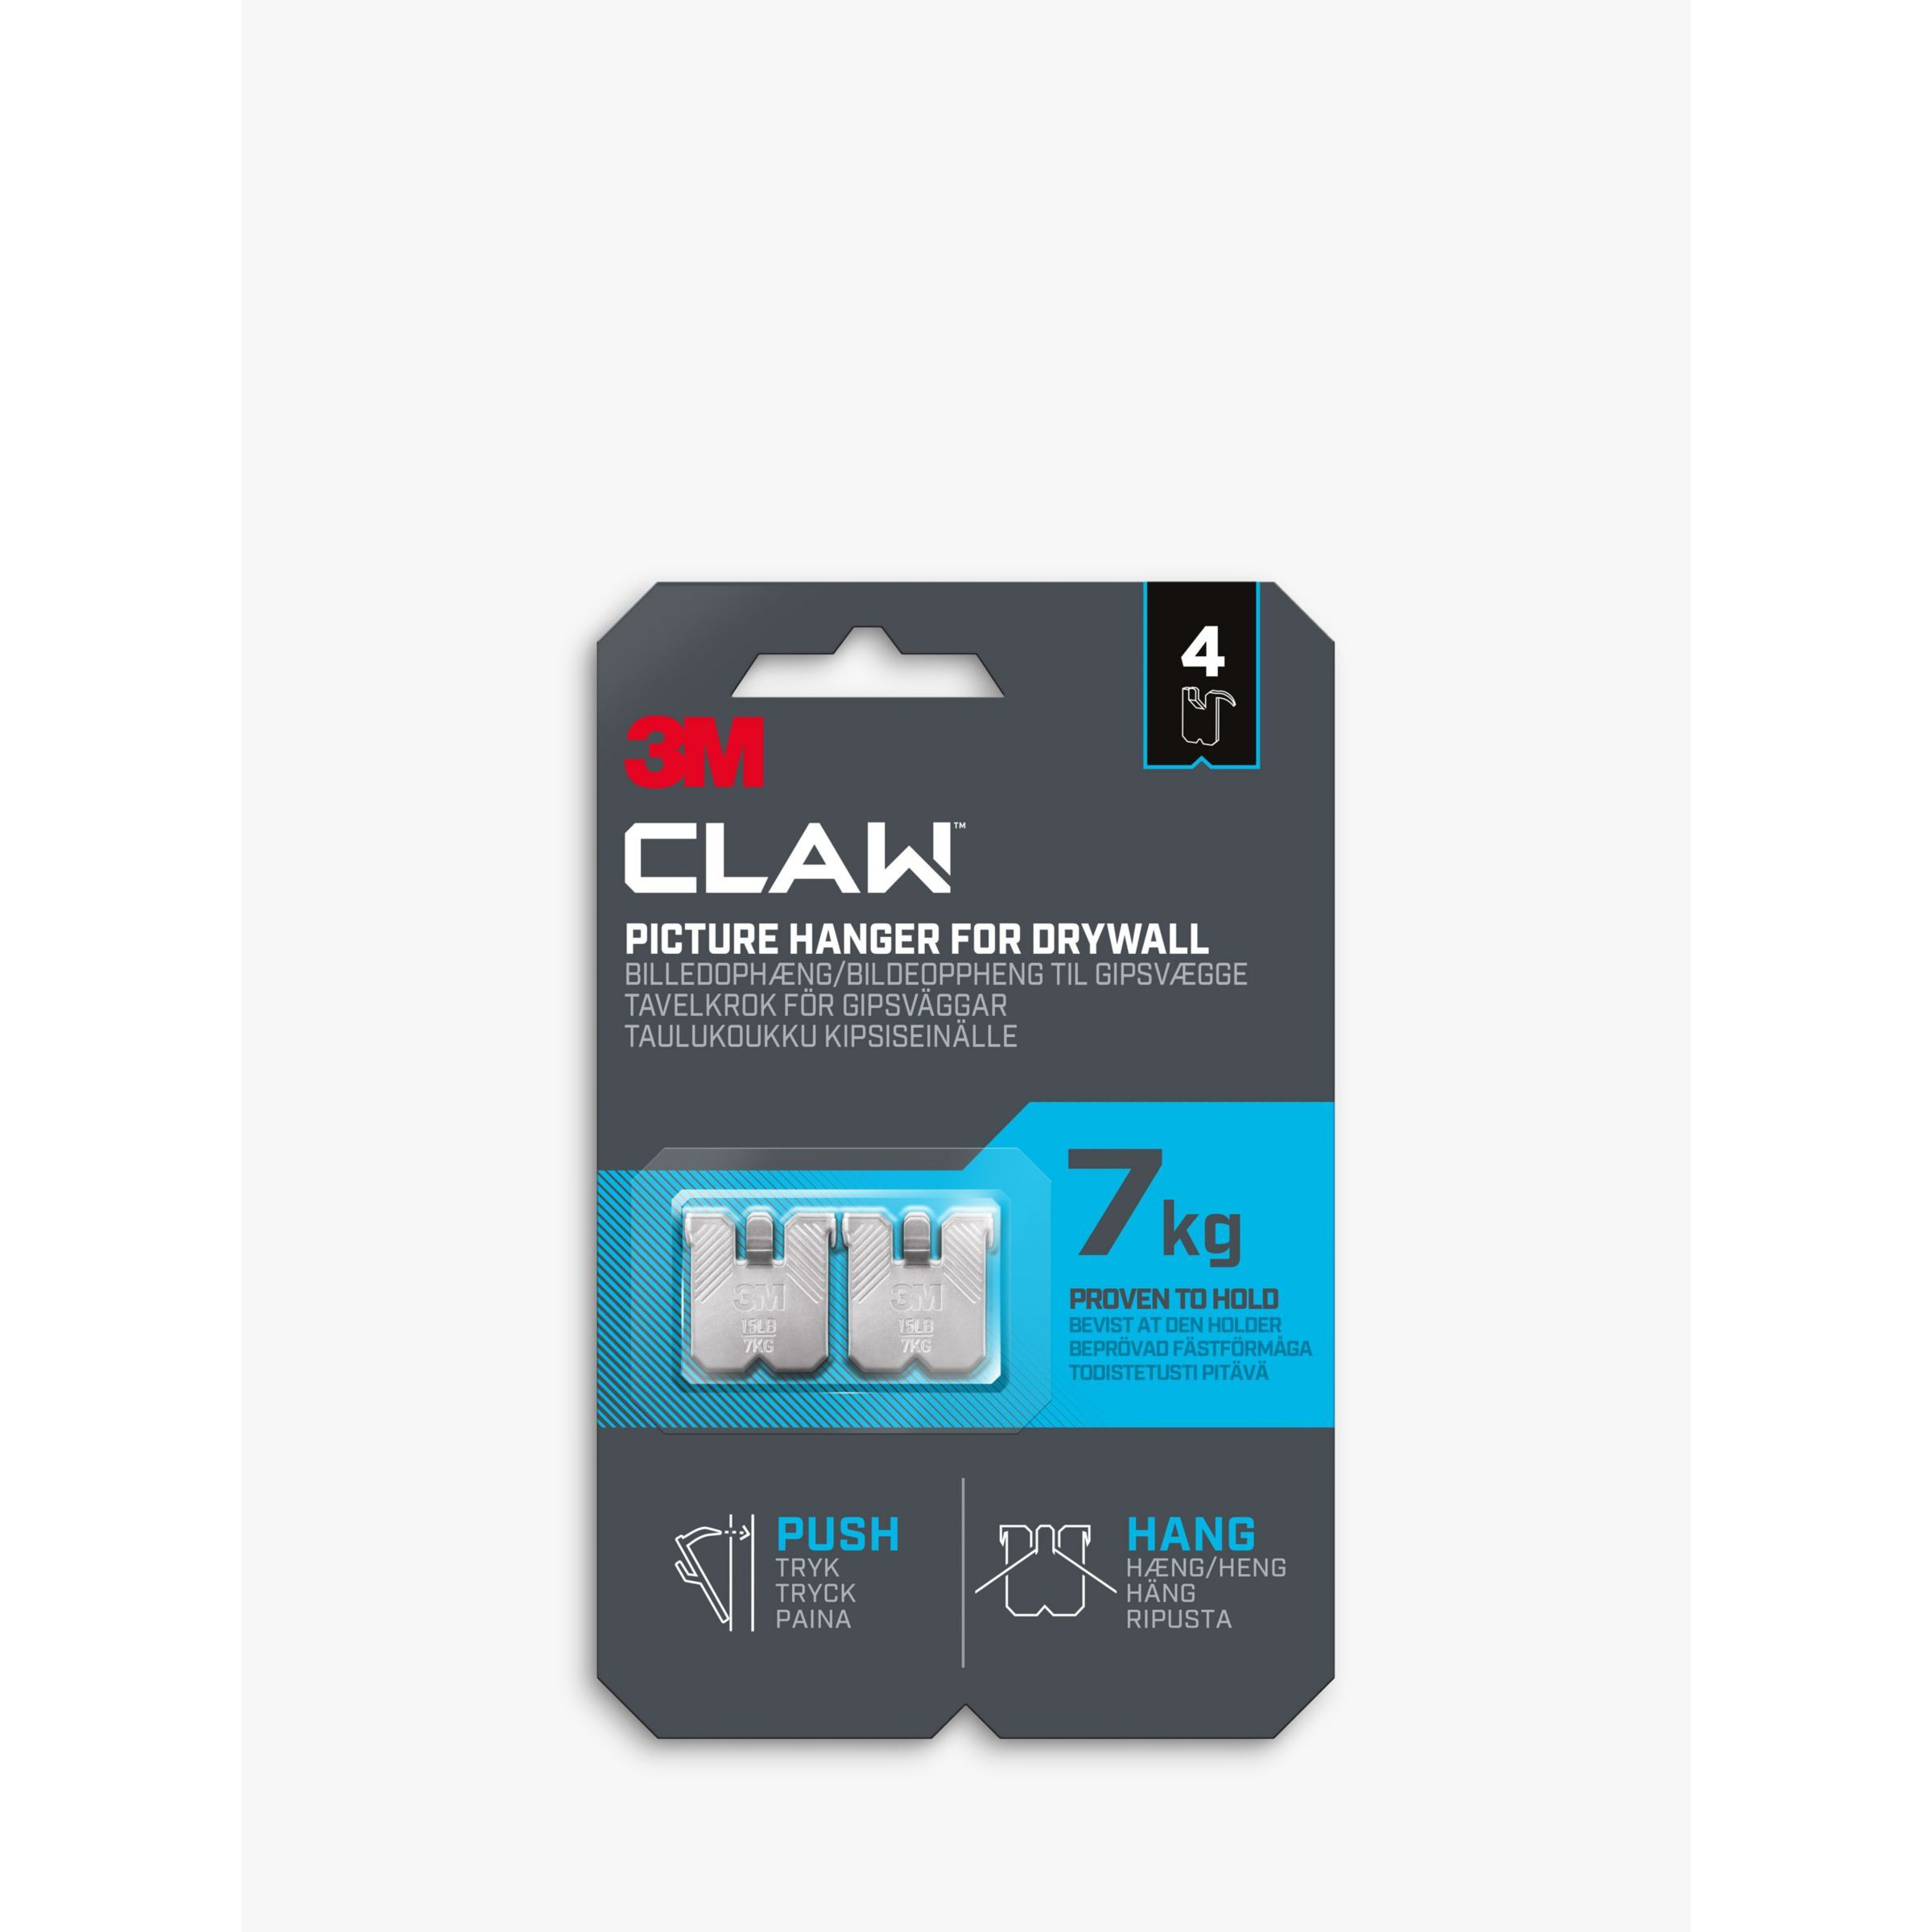 3M CLAW 3M Steel Claw Drywall Picture Hanger, Pack of 4, 7kg by John Lewis  & Partners